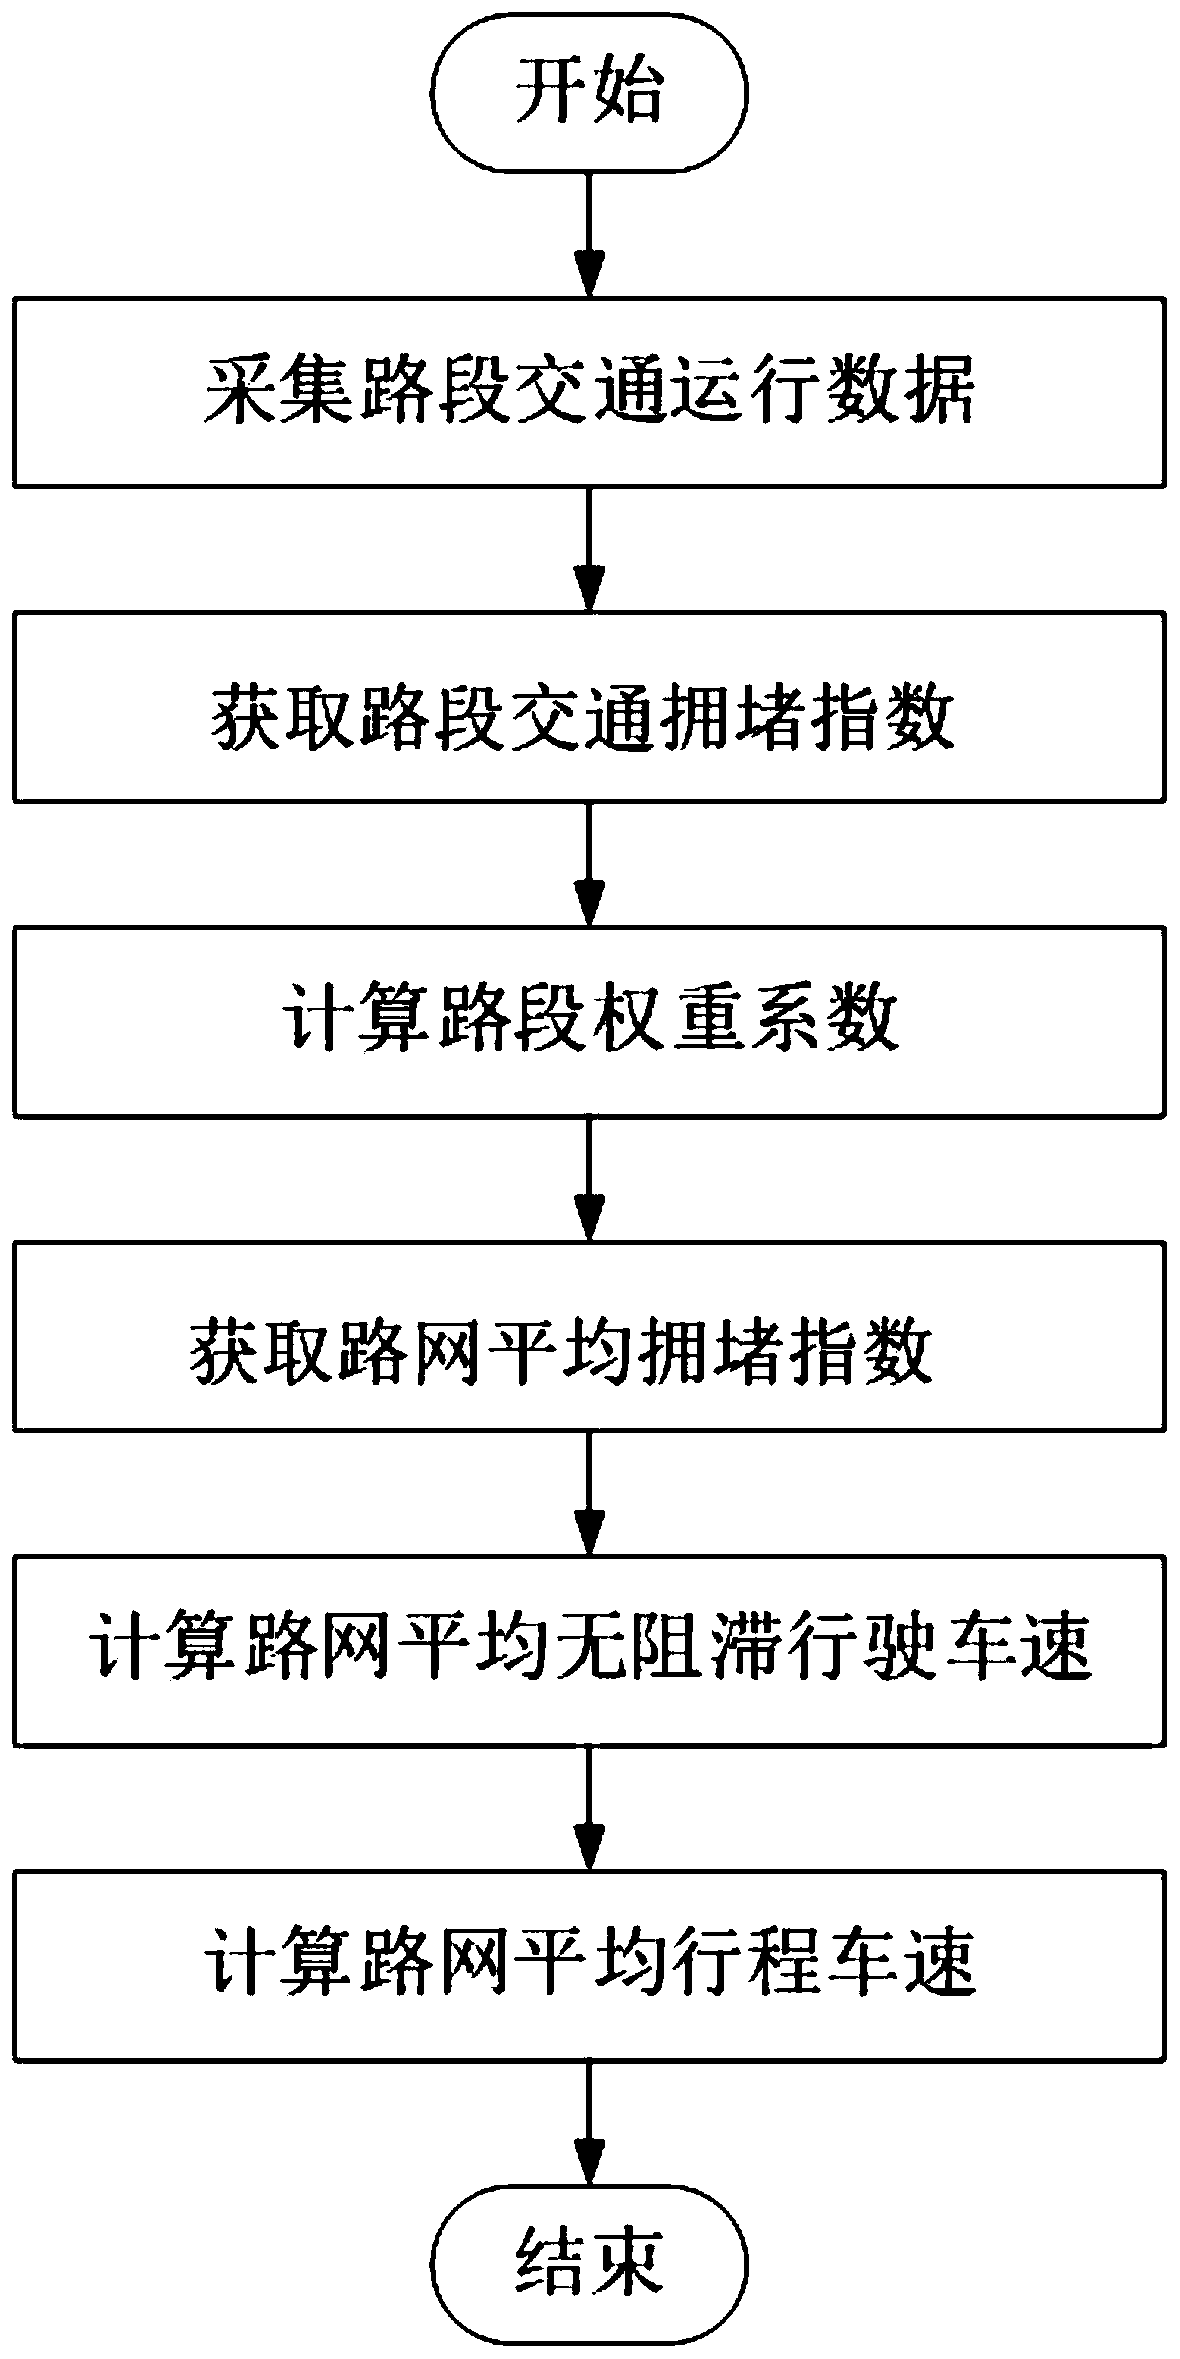 Road network traffic operation condition evaluation method based on road section weight coefficient